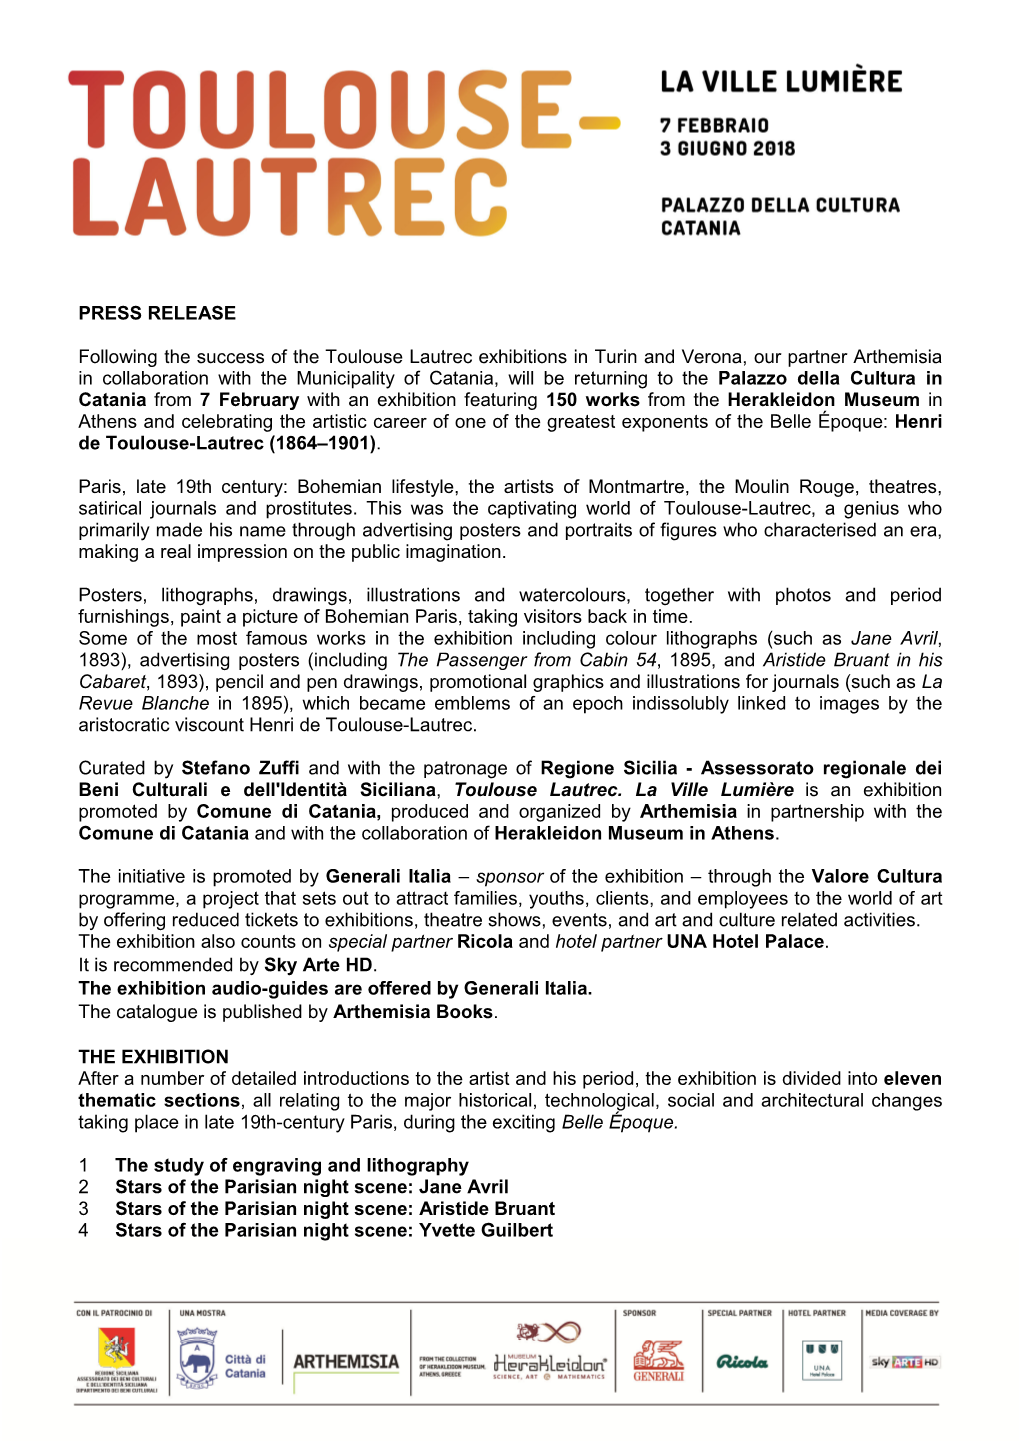 PRESS RELEASE Following the Success of the Toulouse Lautrec